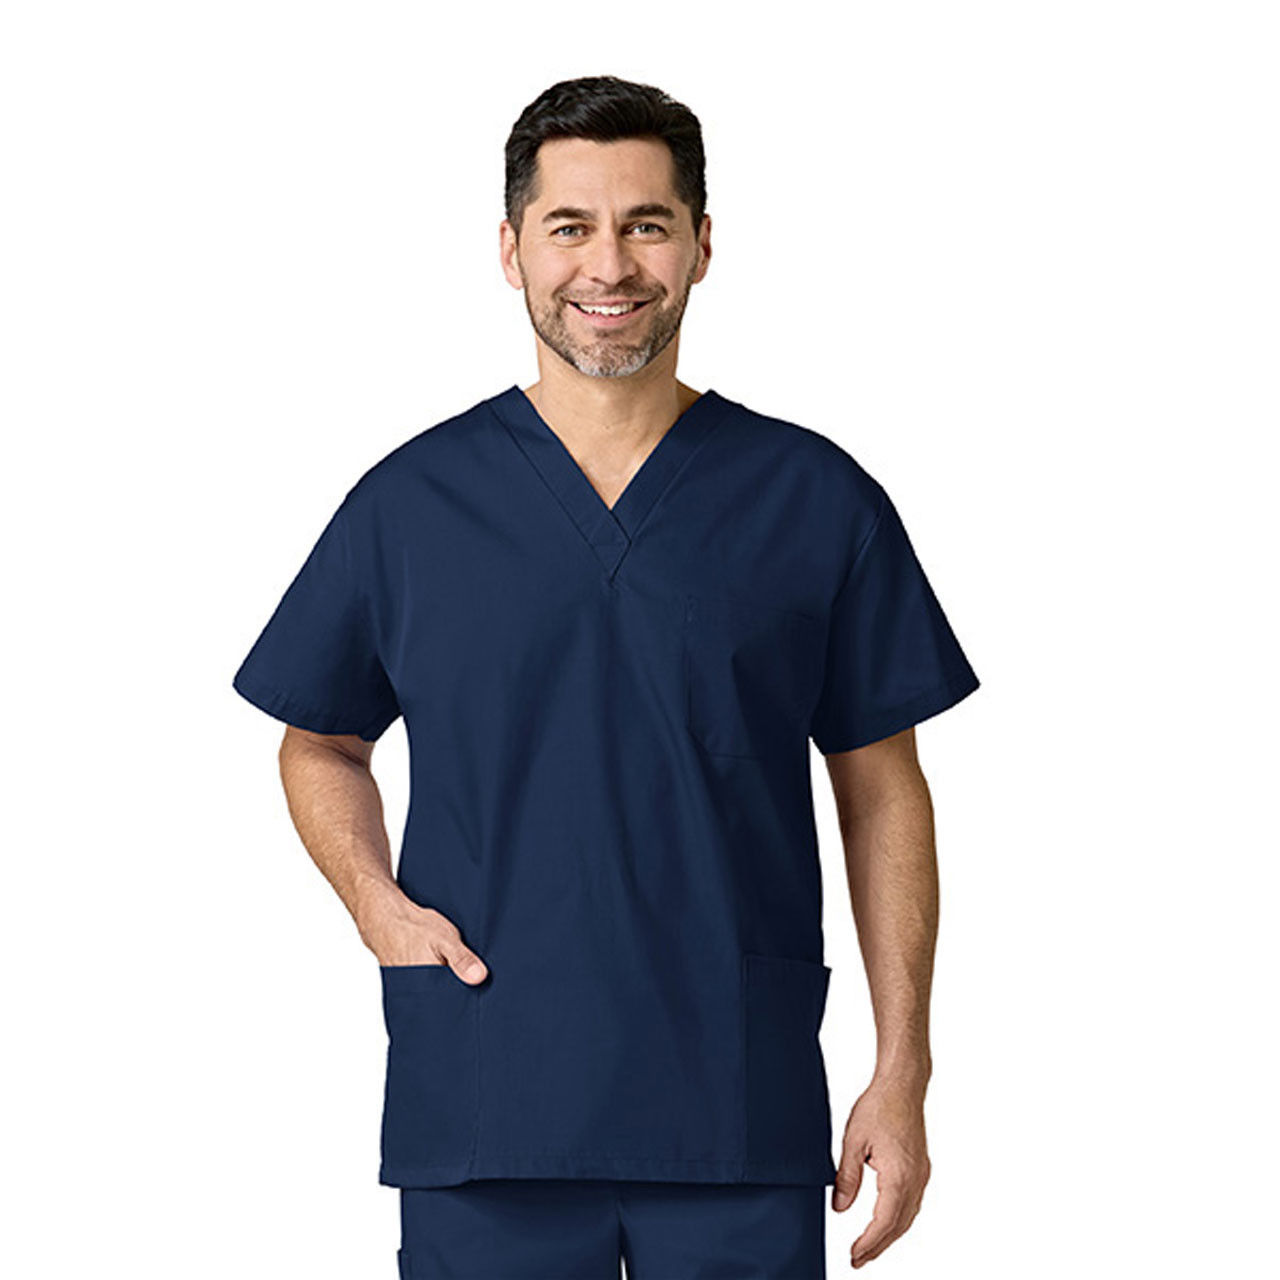 How many pockets does the Navy Blue Scrub Top have?